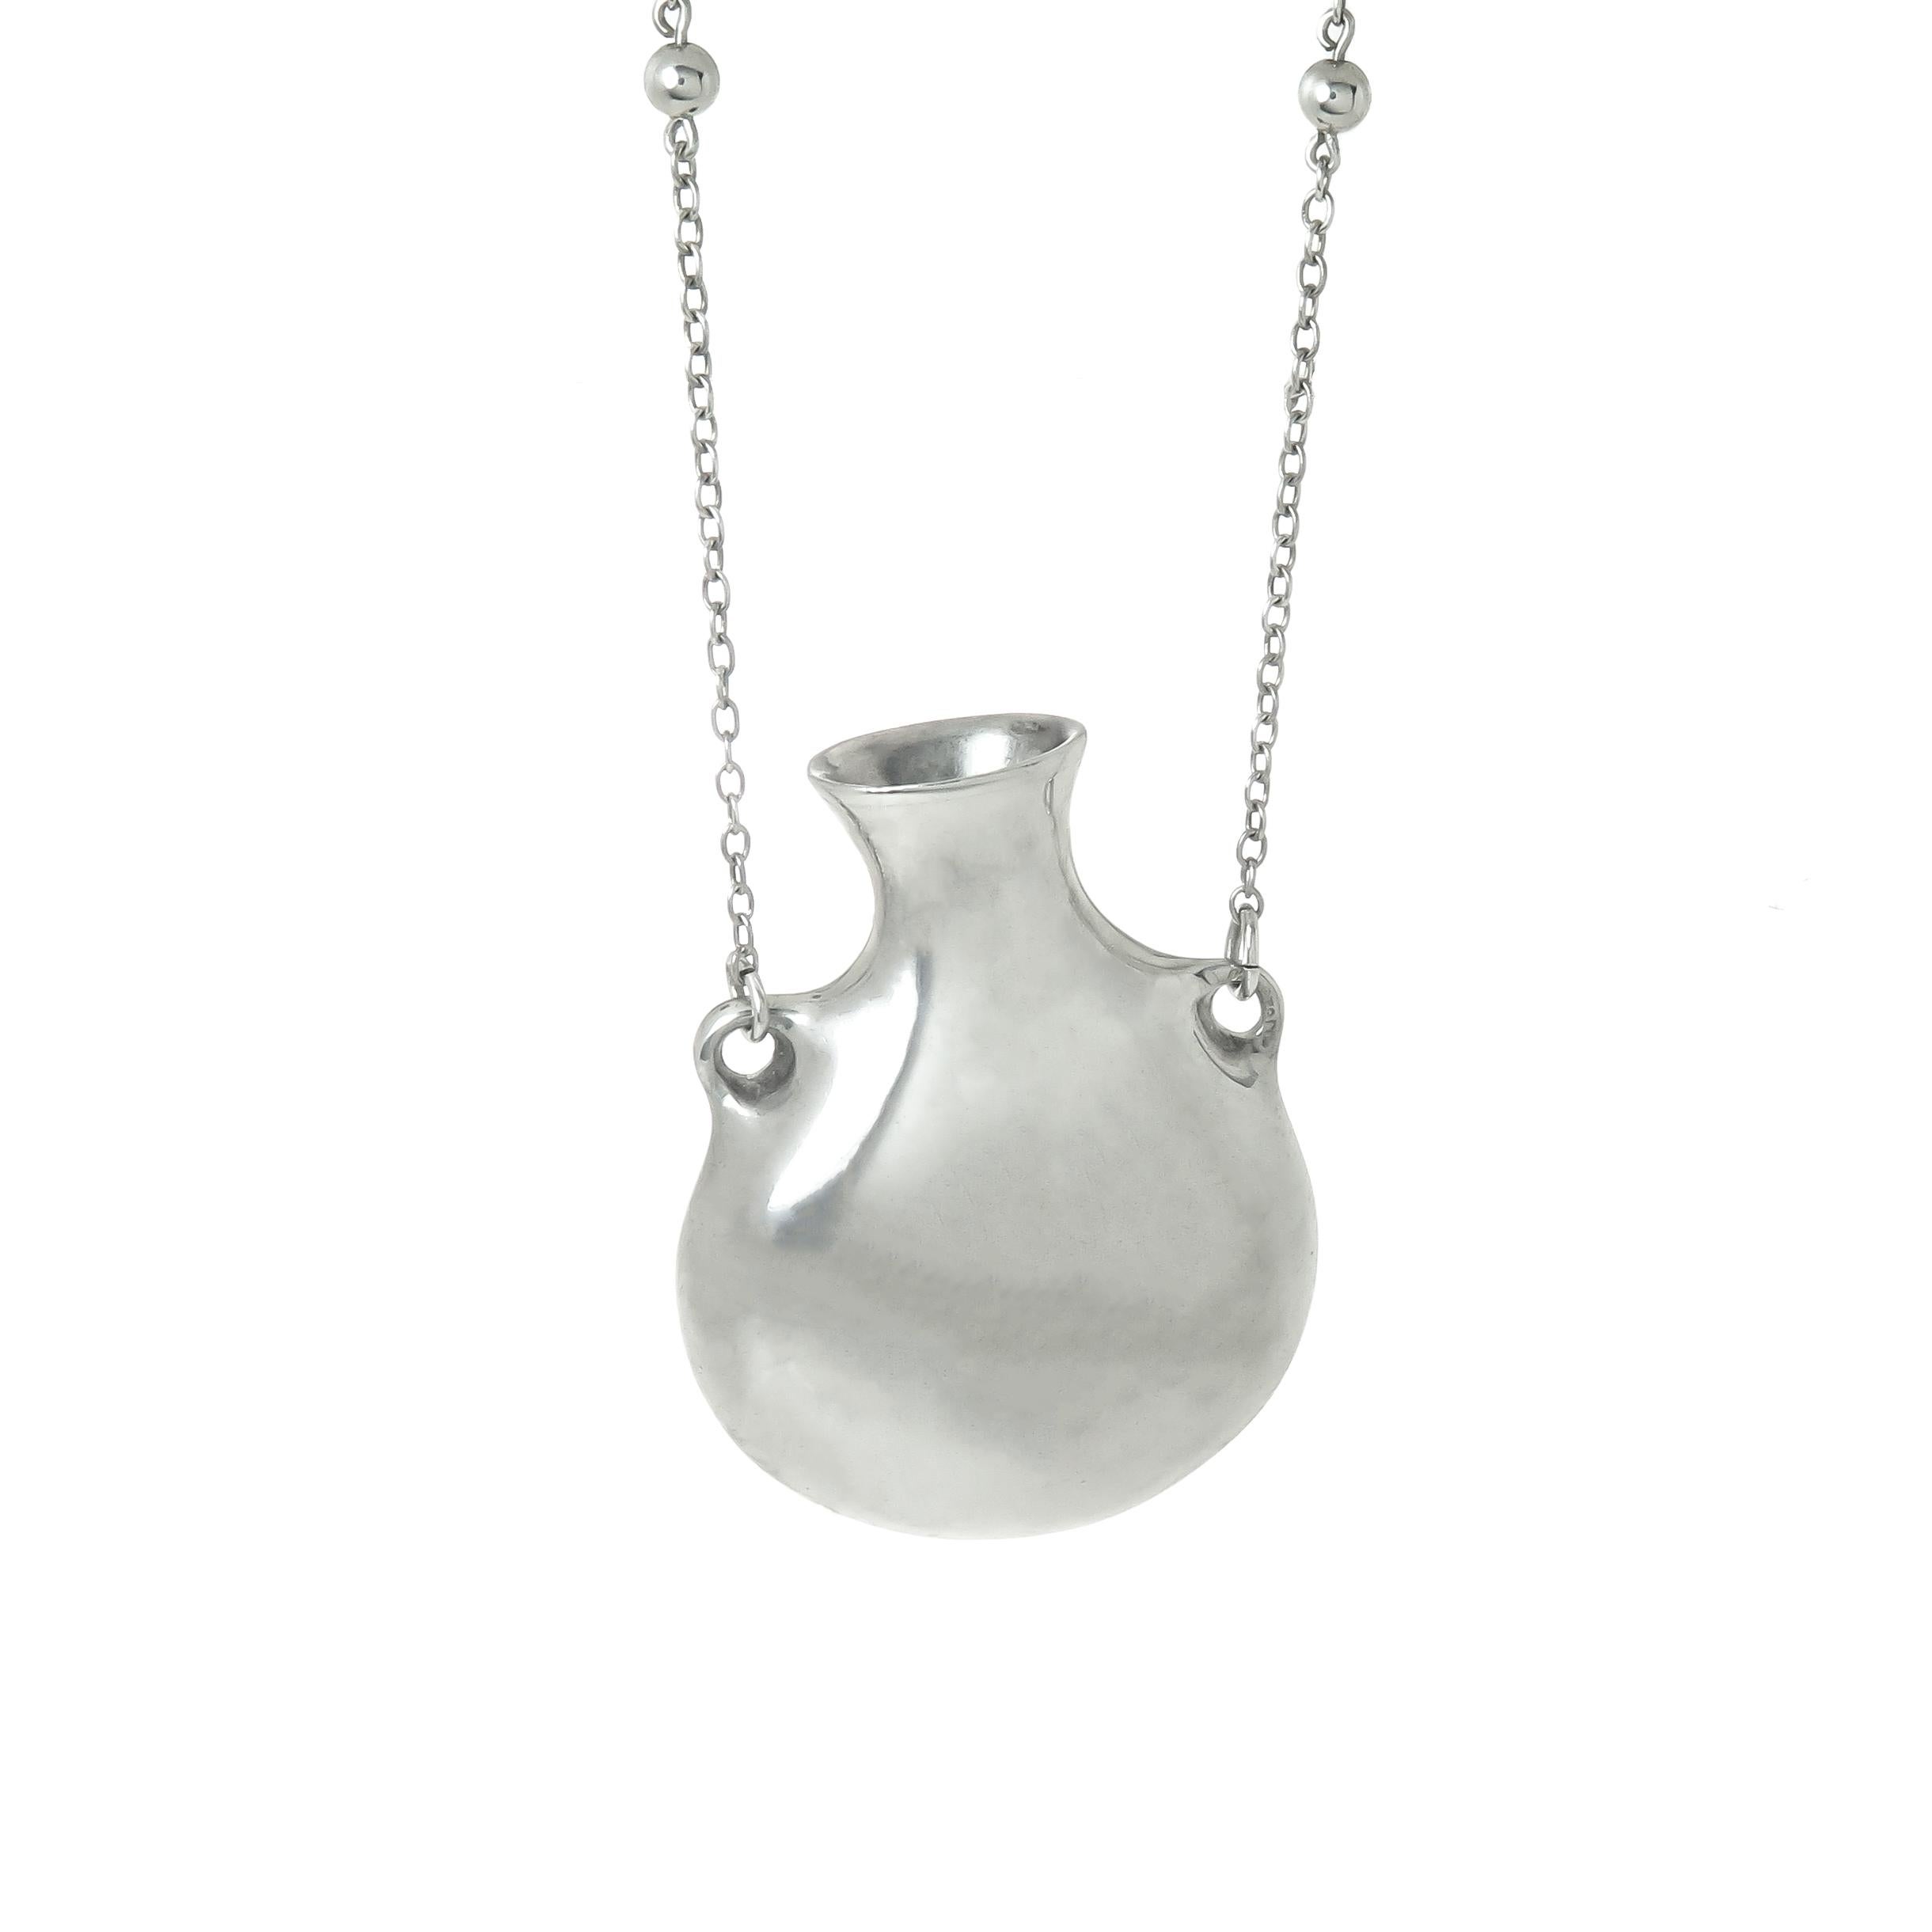 Circa 1990 Elsa Peretti for Tiffany & Company Sterling Silver Scent bottle Pendant Necklace. The bottle measures 1 3/4 X 1 1/4 inch and is suspended from a 30 inch chain.